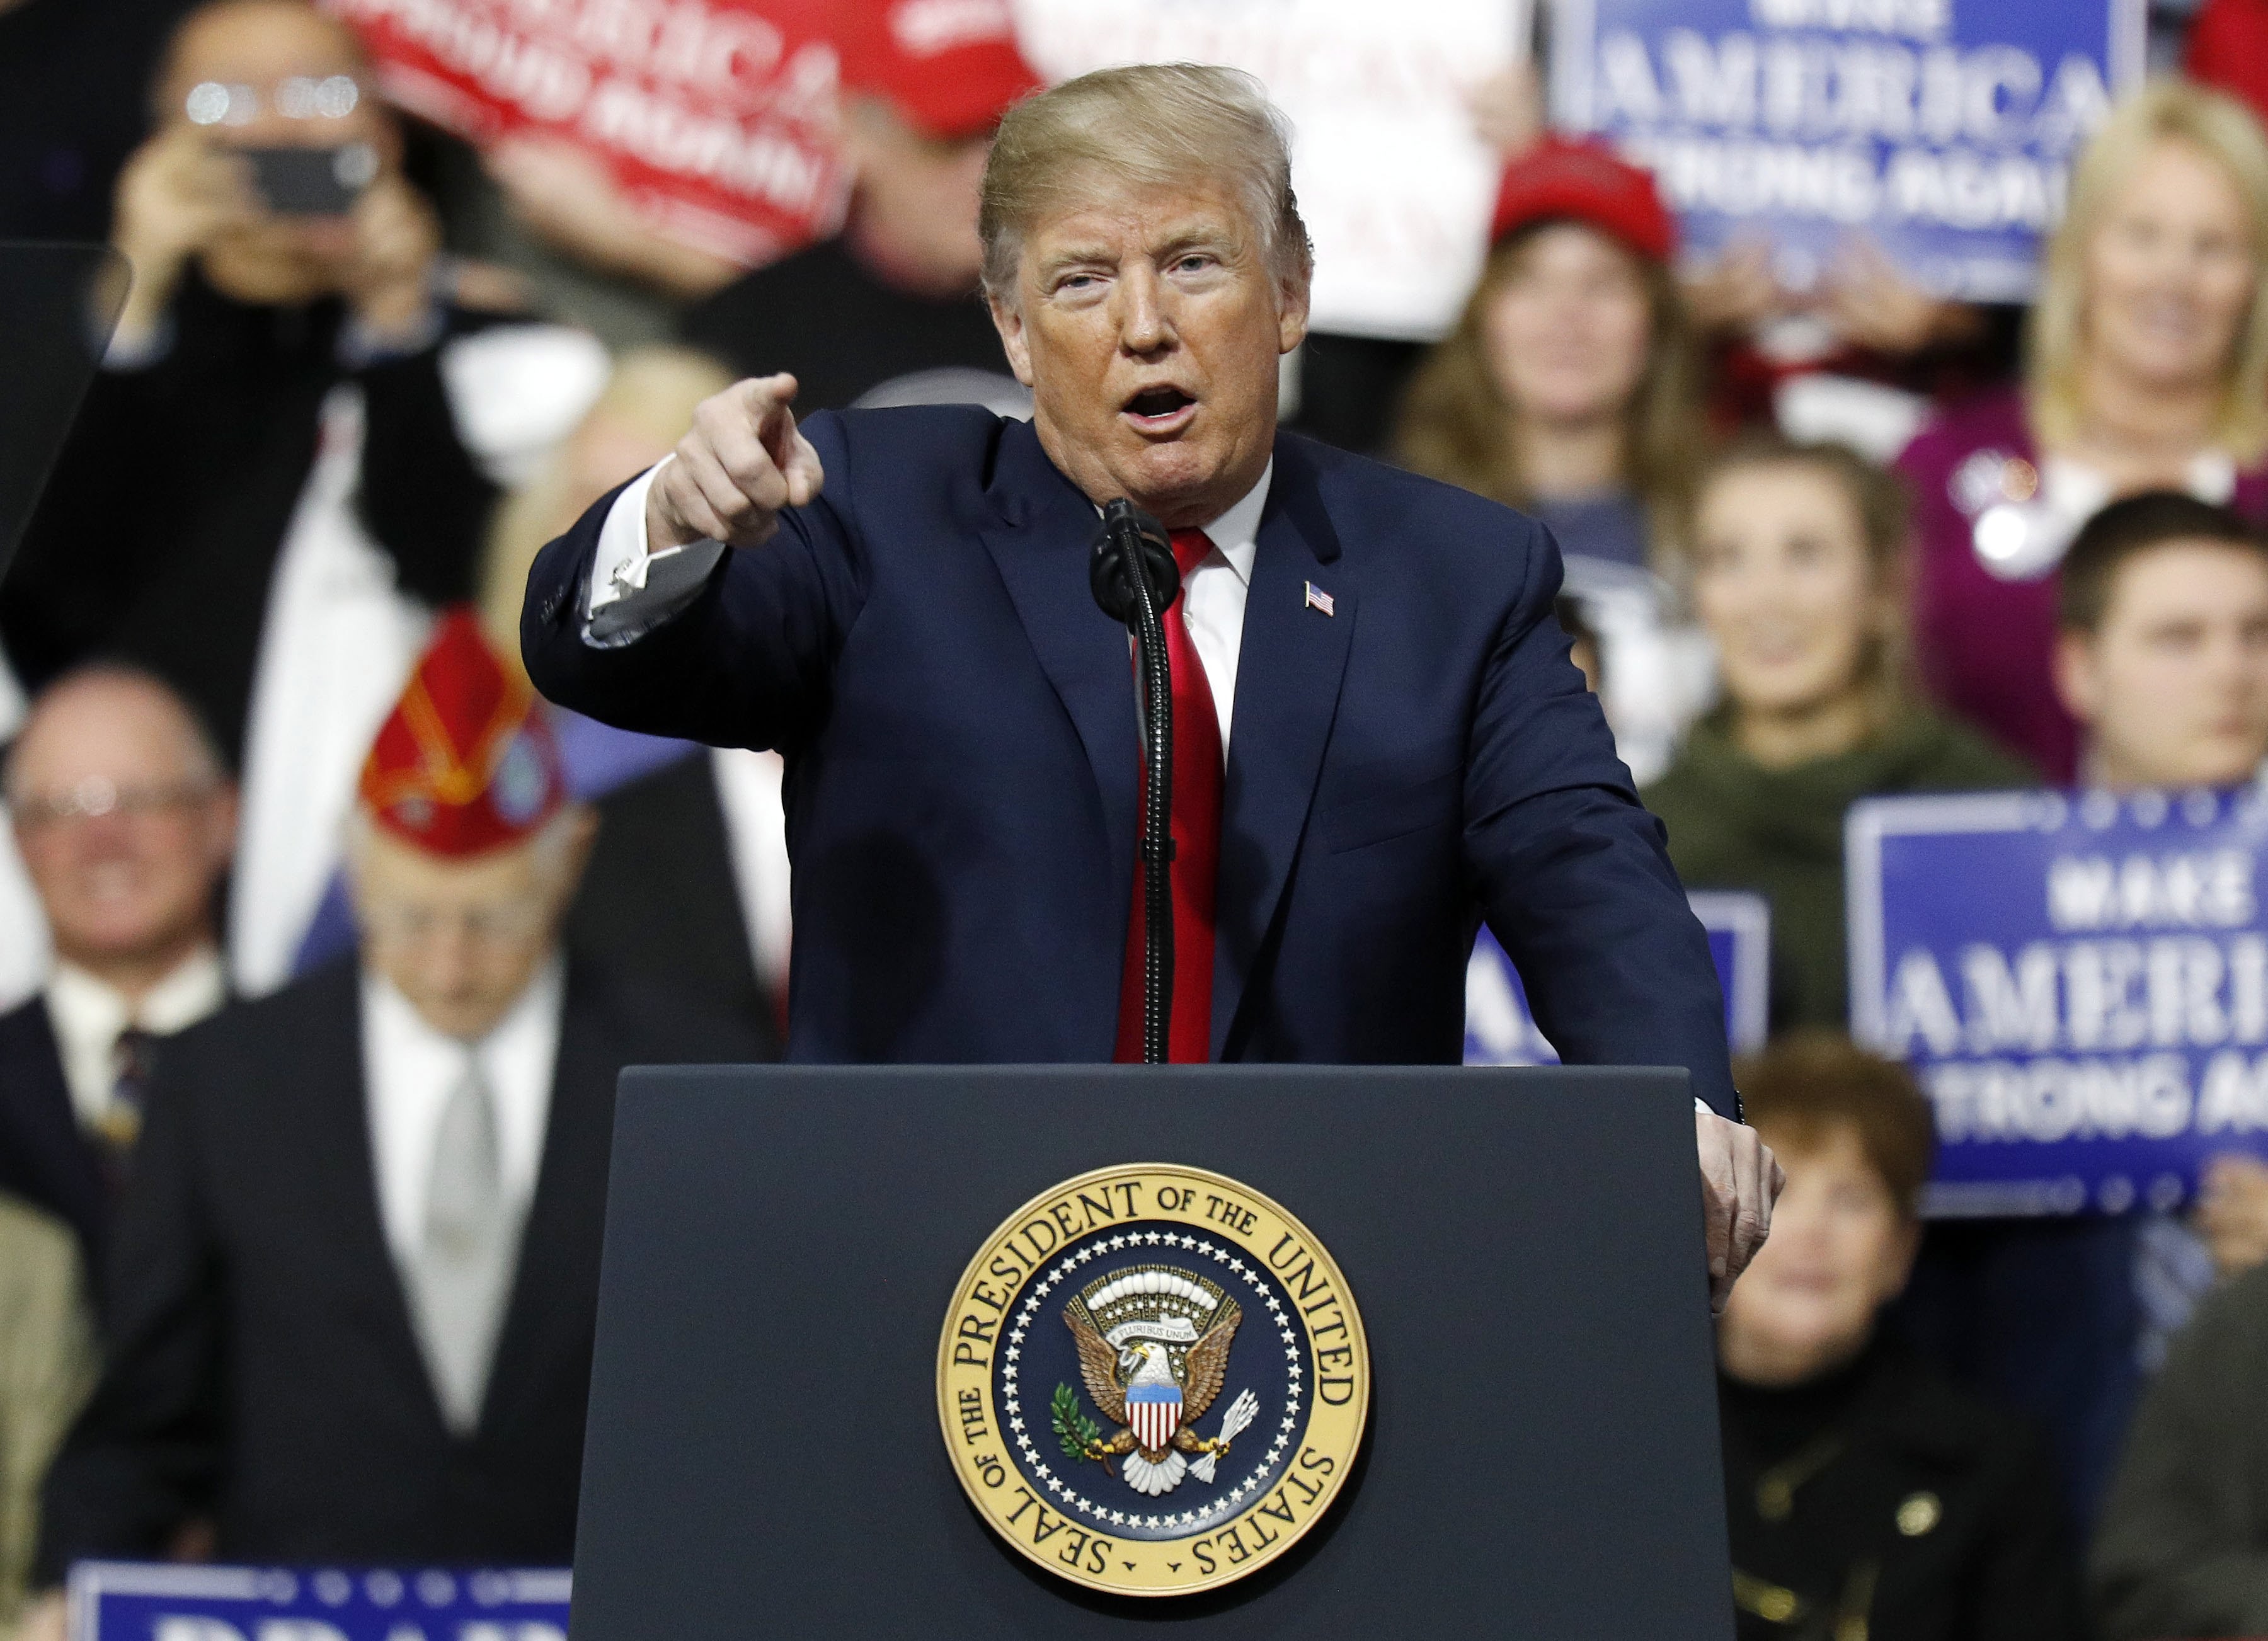 US President Donald Trump speaks during a campaign rally at Atlantic Aviation in Pennsylvania on March 10. Photo: EPA-EFE